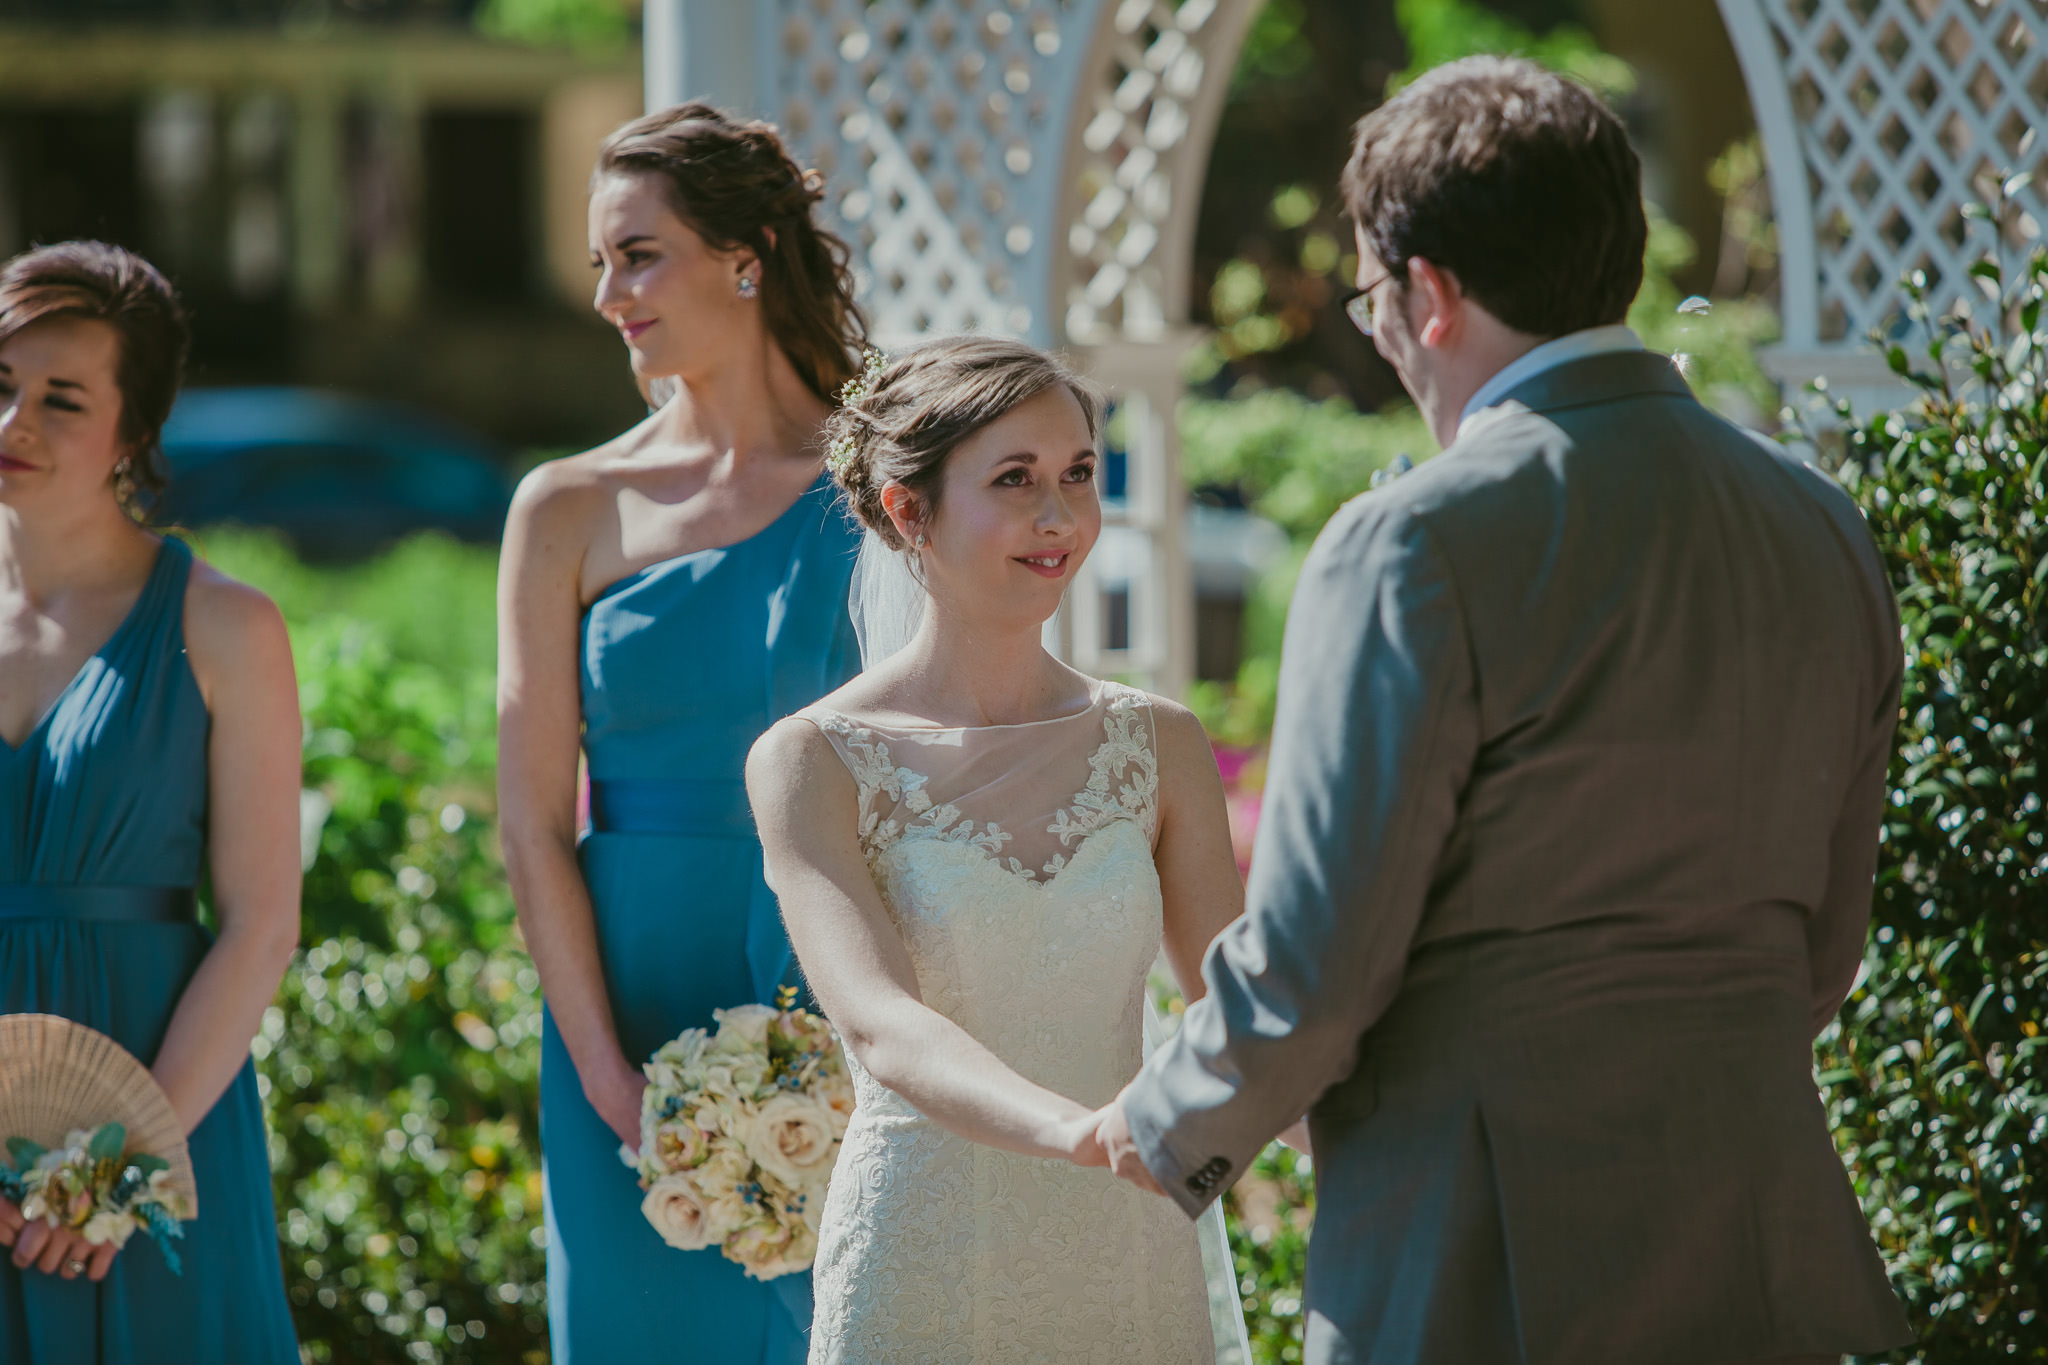 The bride gazes lovingly at her groom during their Shuford House wedding